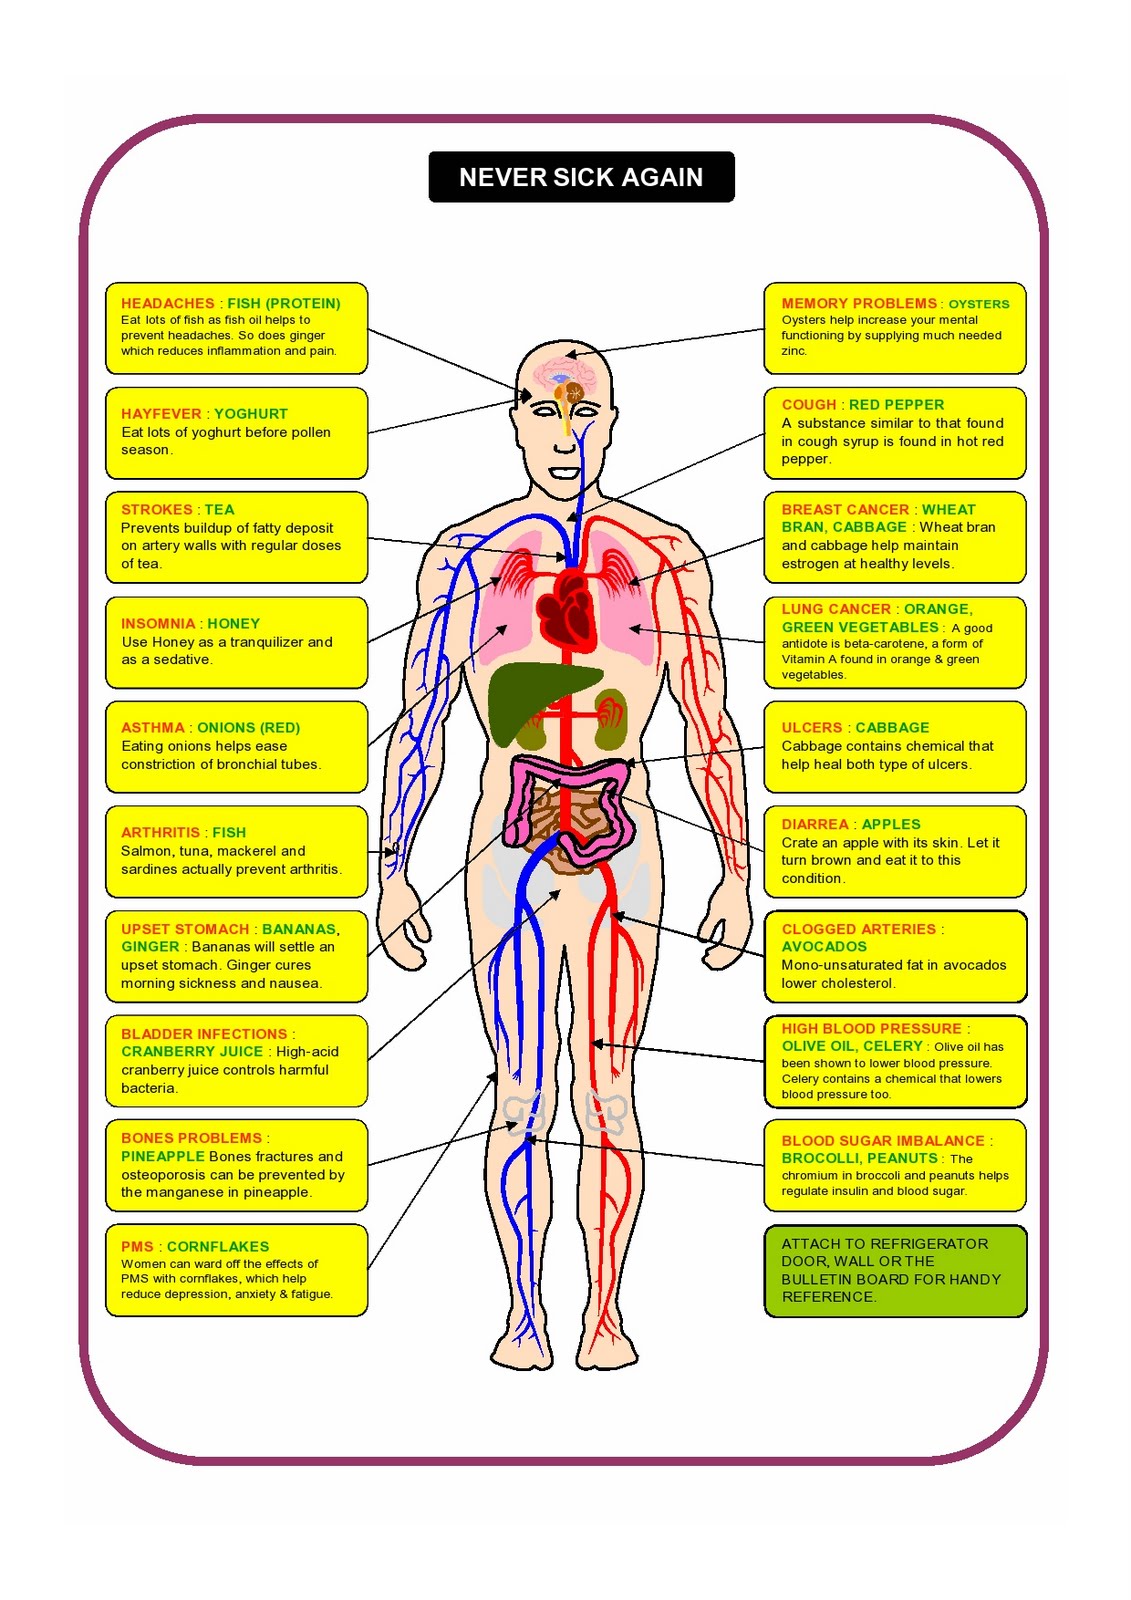 Health Tips on Never Sick Again Chart Diagram Health Fitness Care Tips Facts Benefits